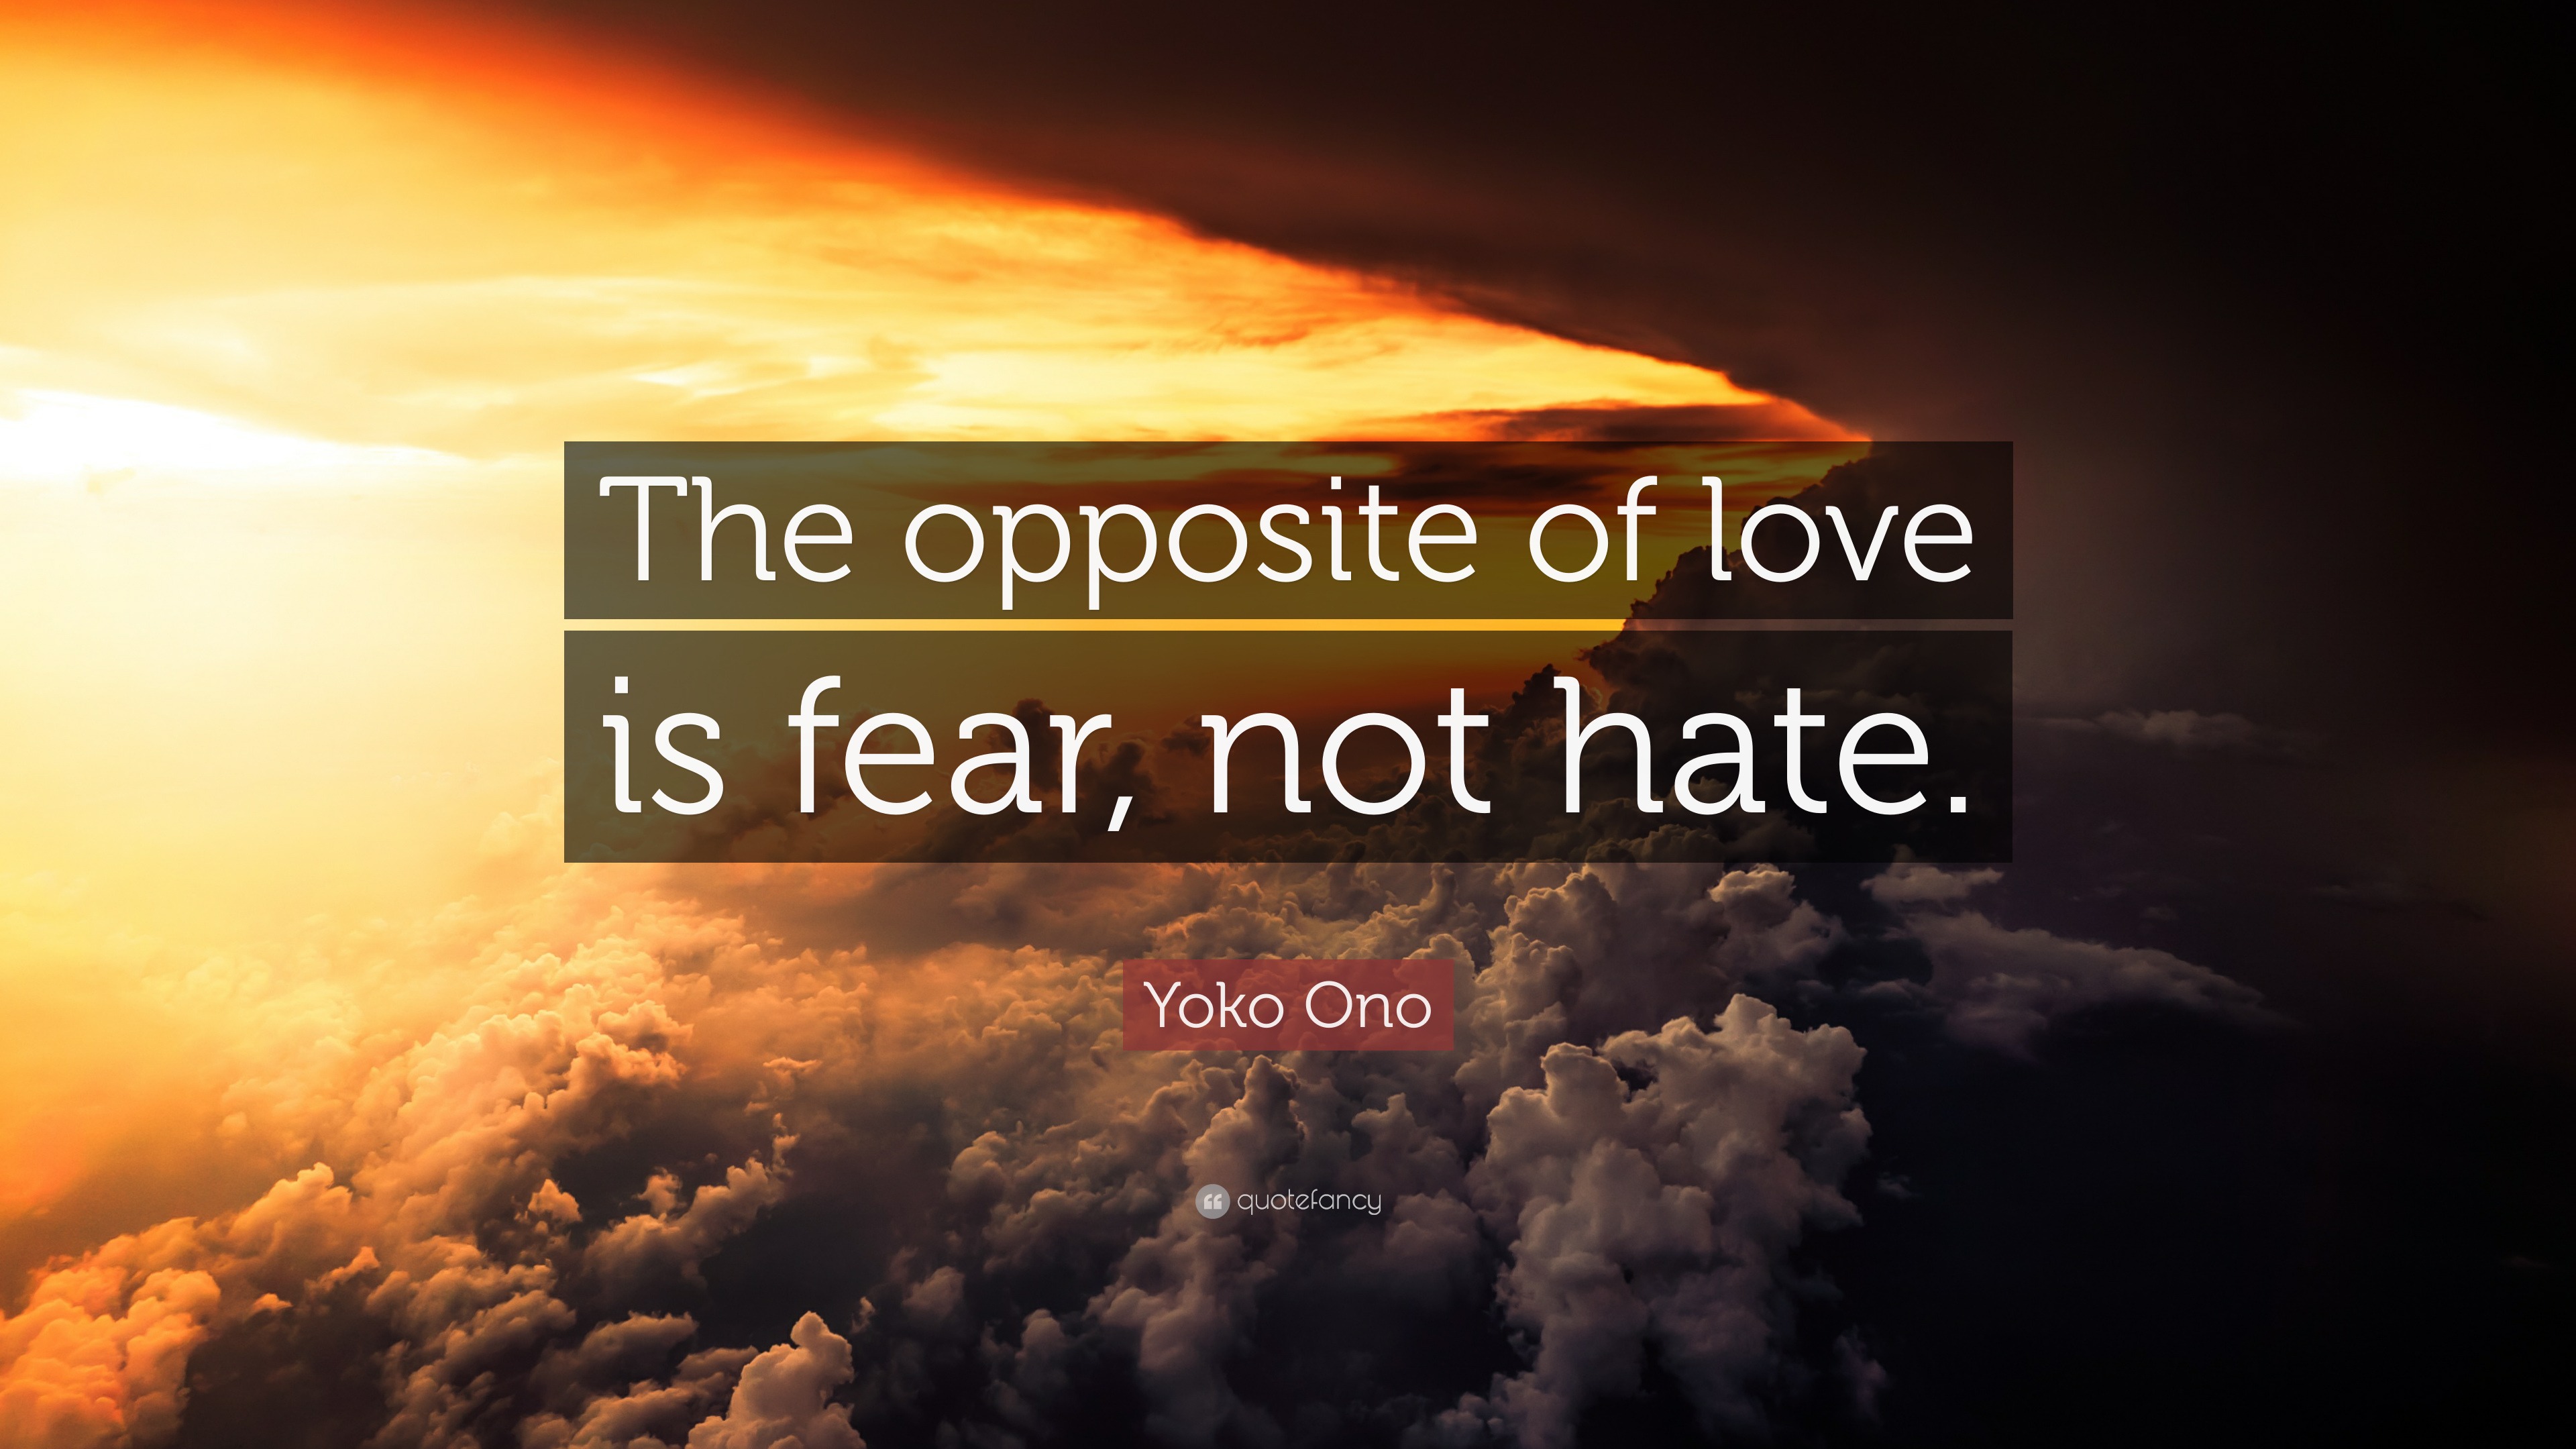 Yoko o Quote “The opposite of love is fear not hate ”